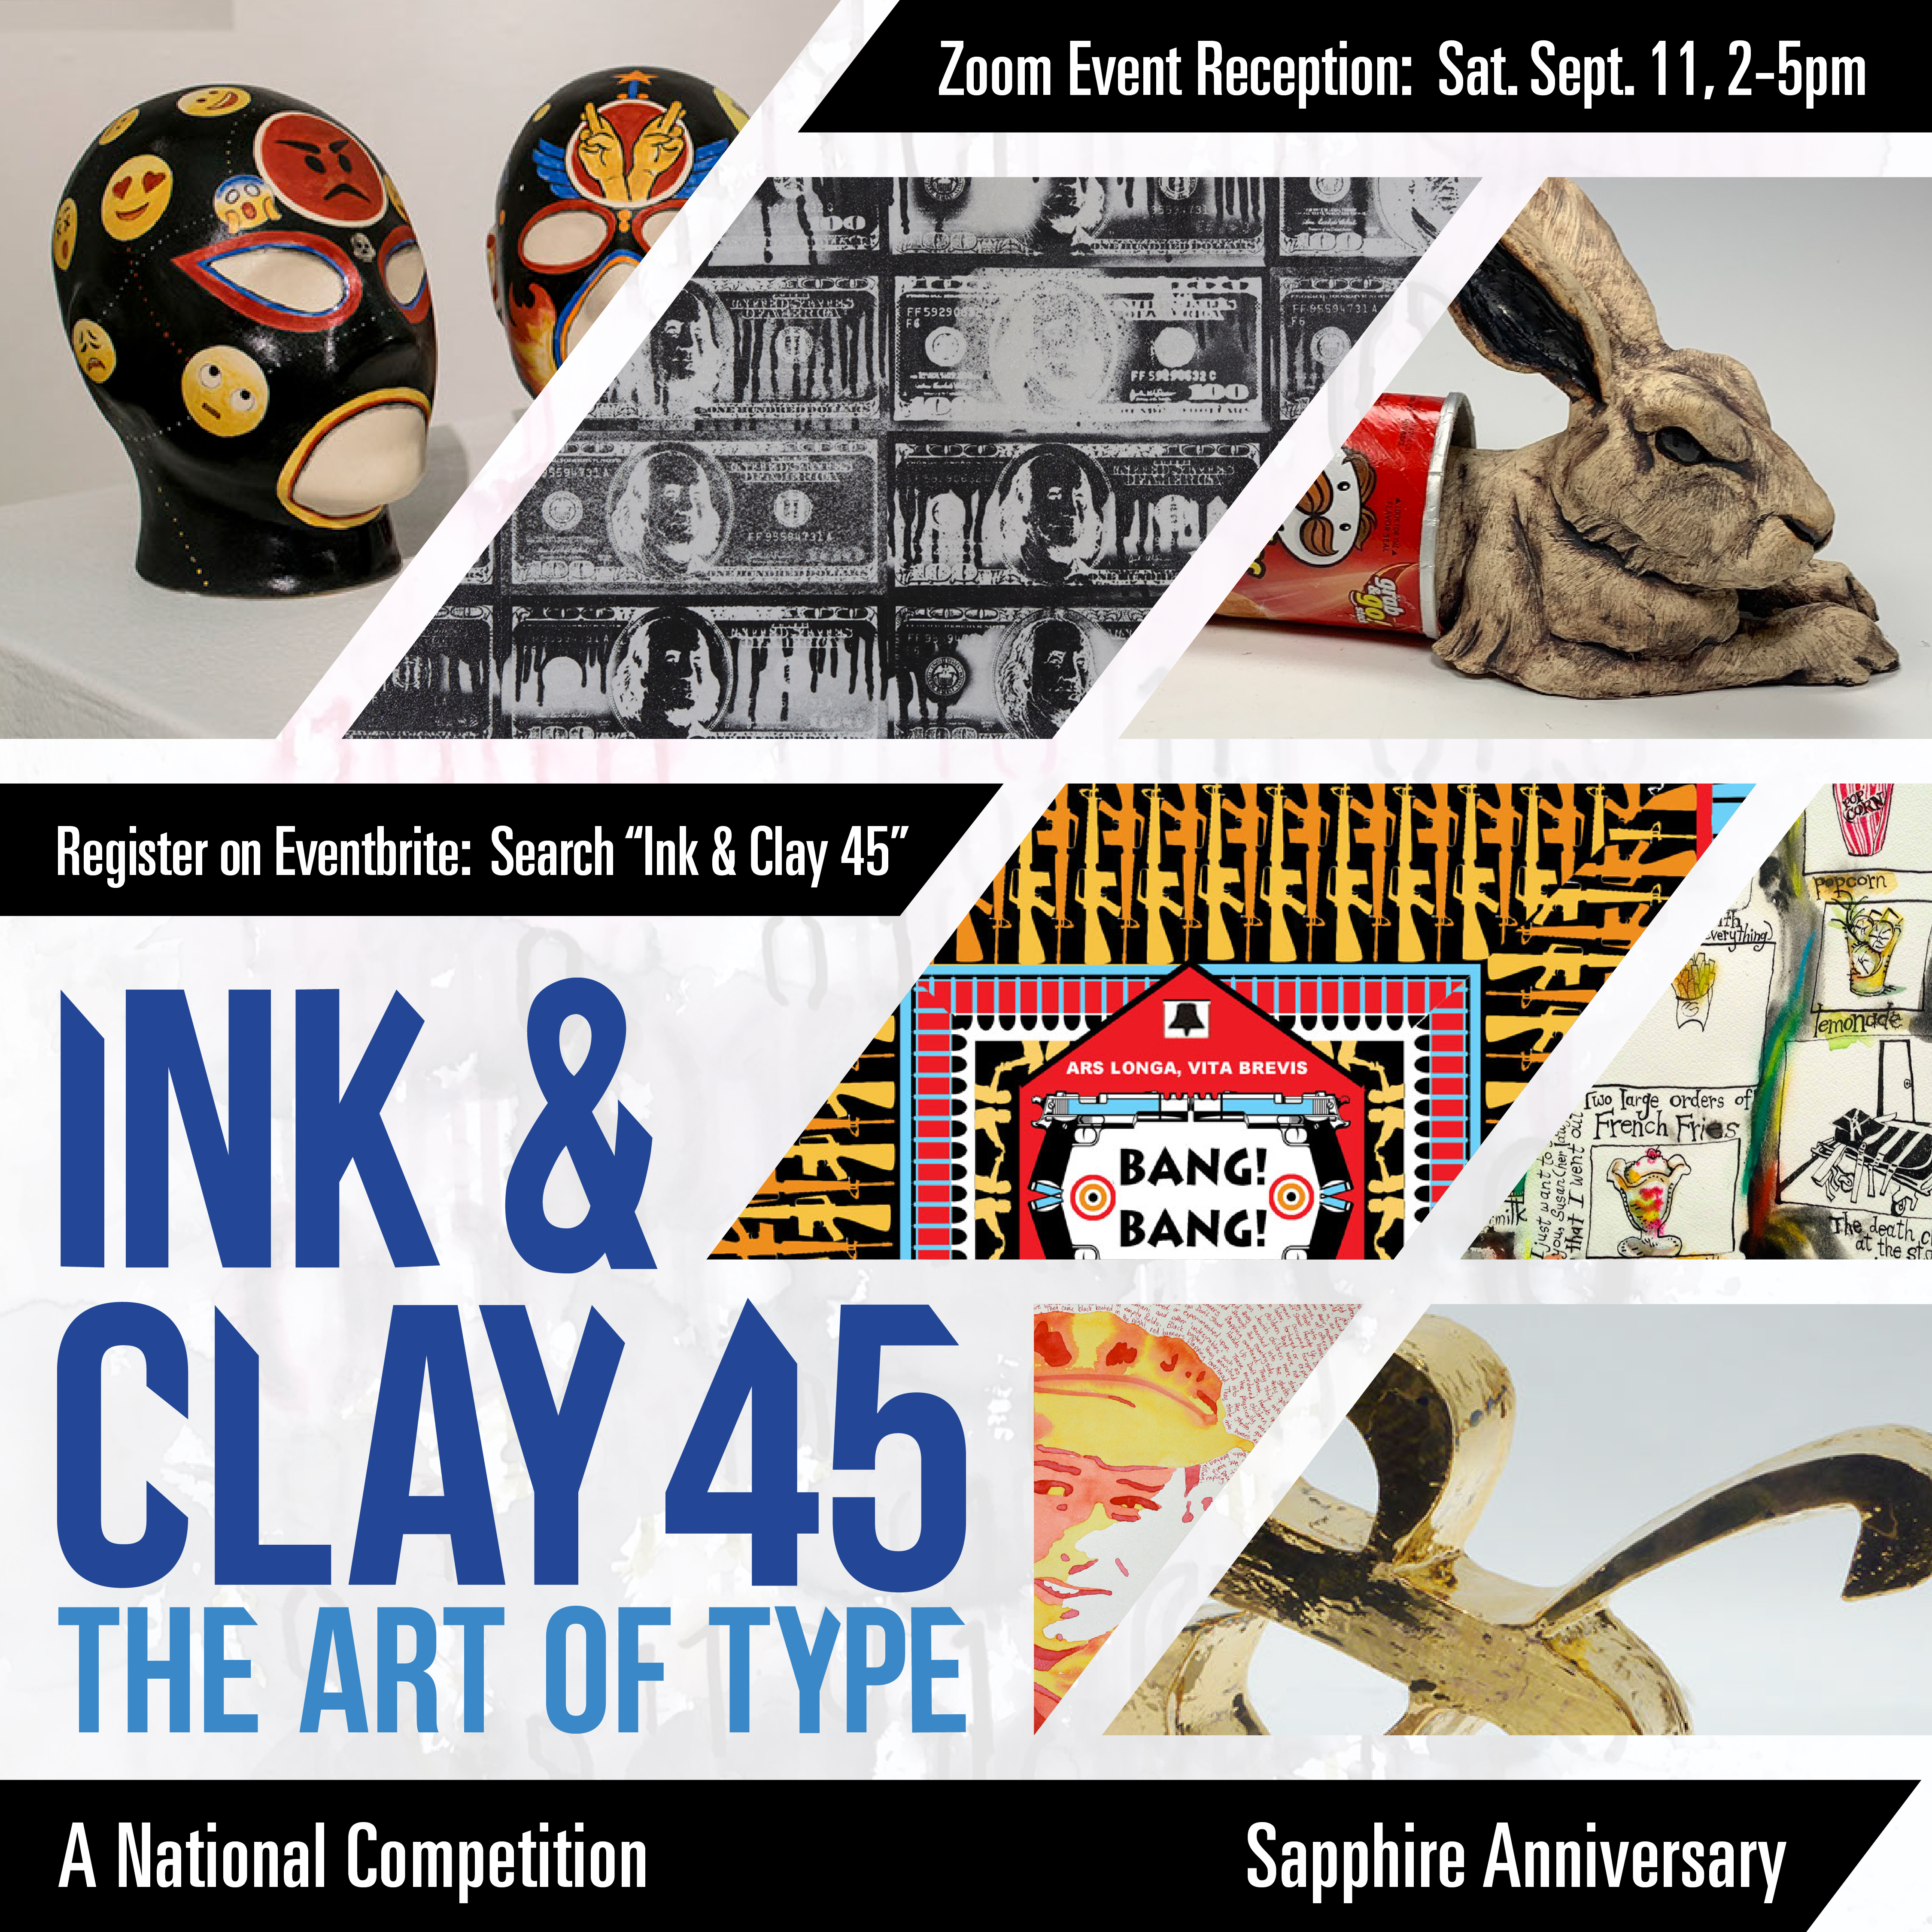 Ink & Clay 45 Virtual Exhibition zoom talk and tour September 11, 2 - 5 pm